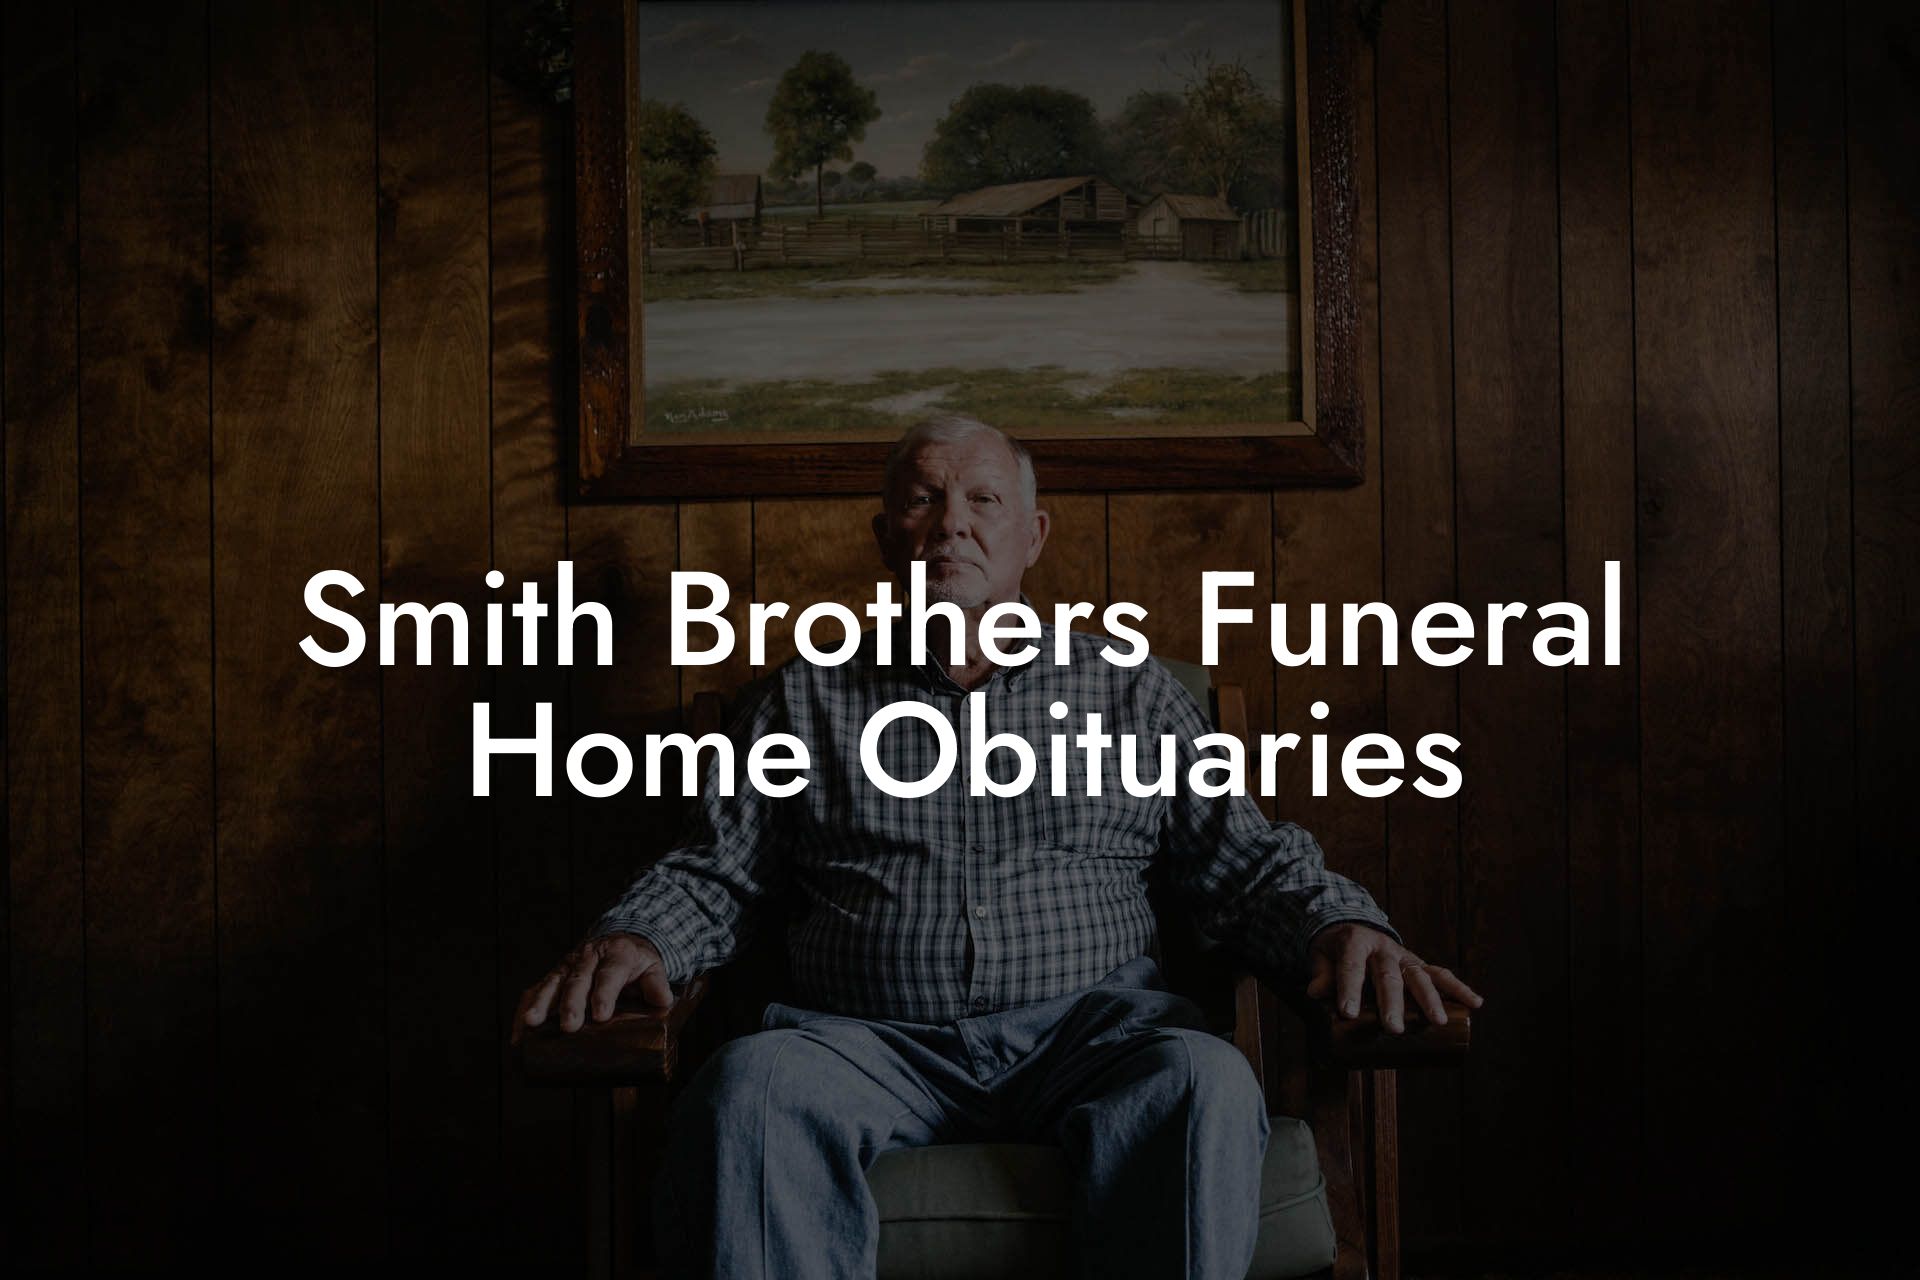 Smith Brothers Funeral Home Obituaries